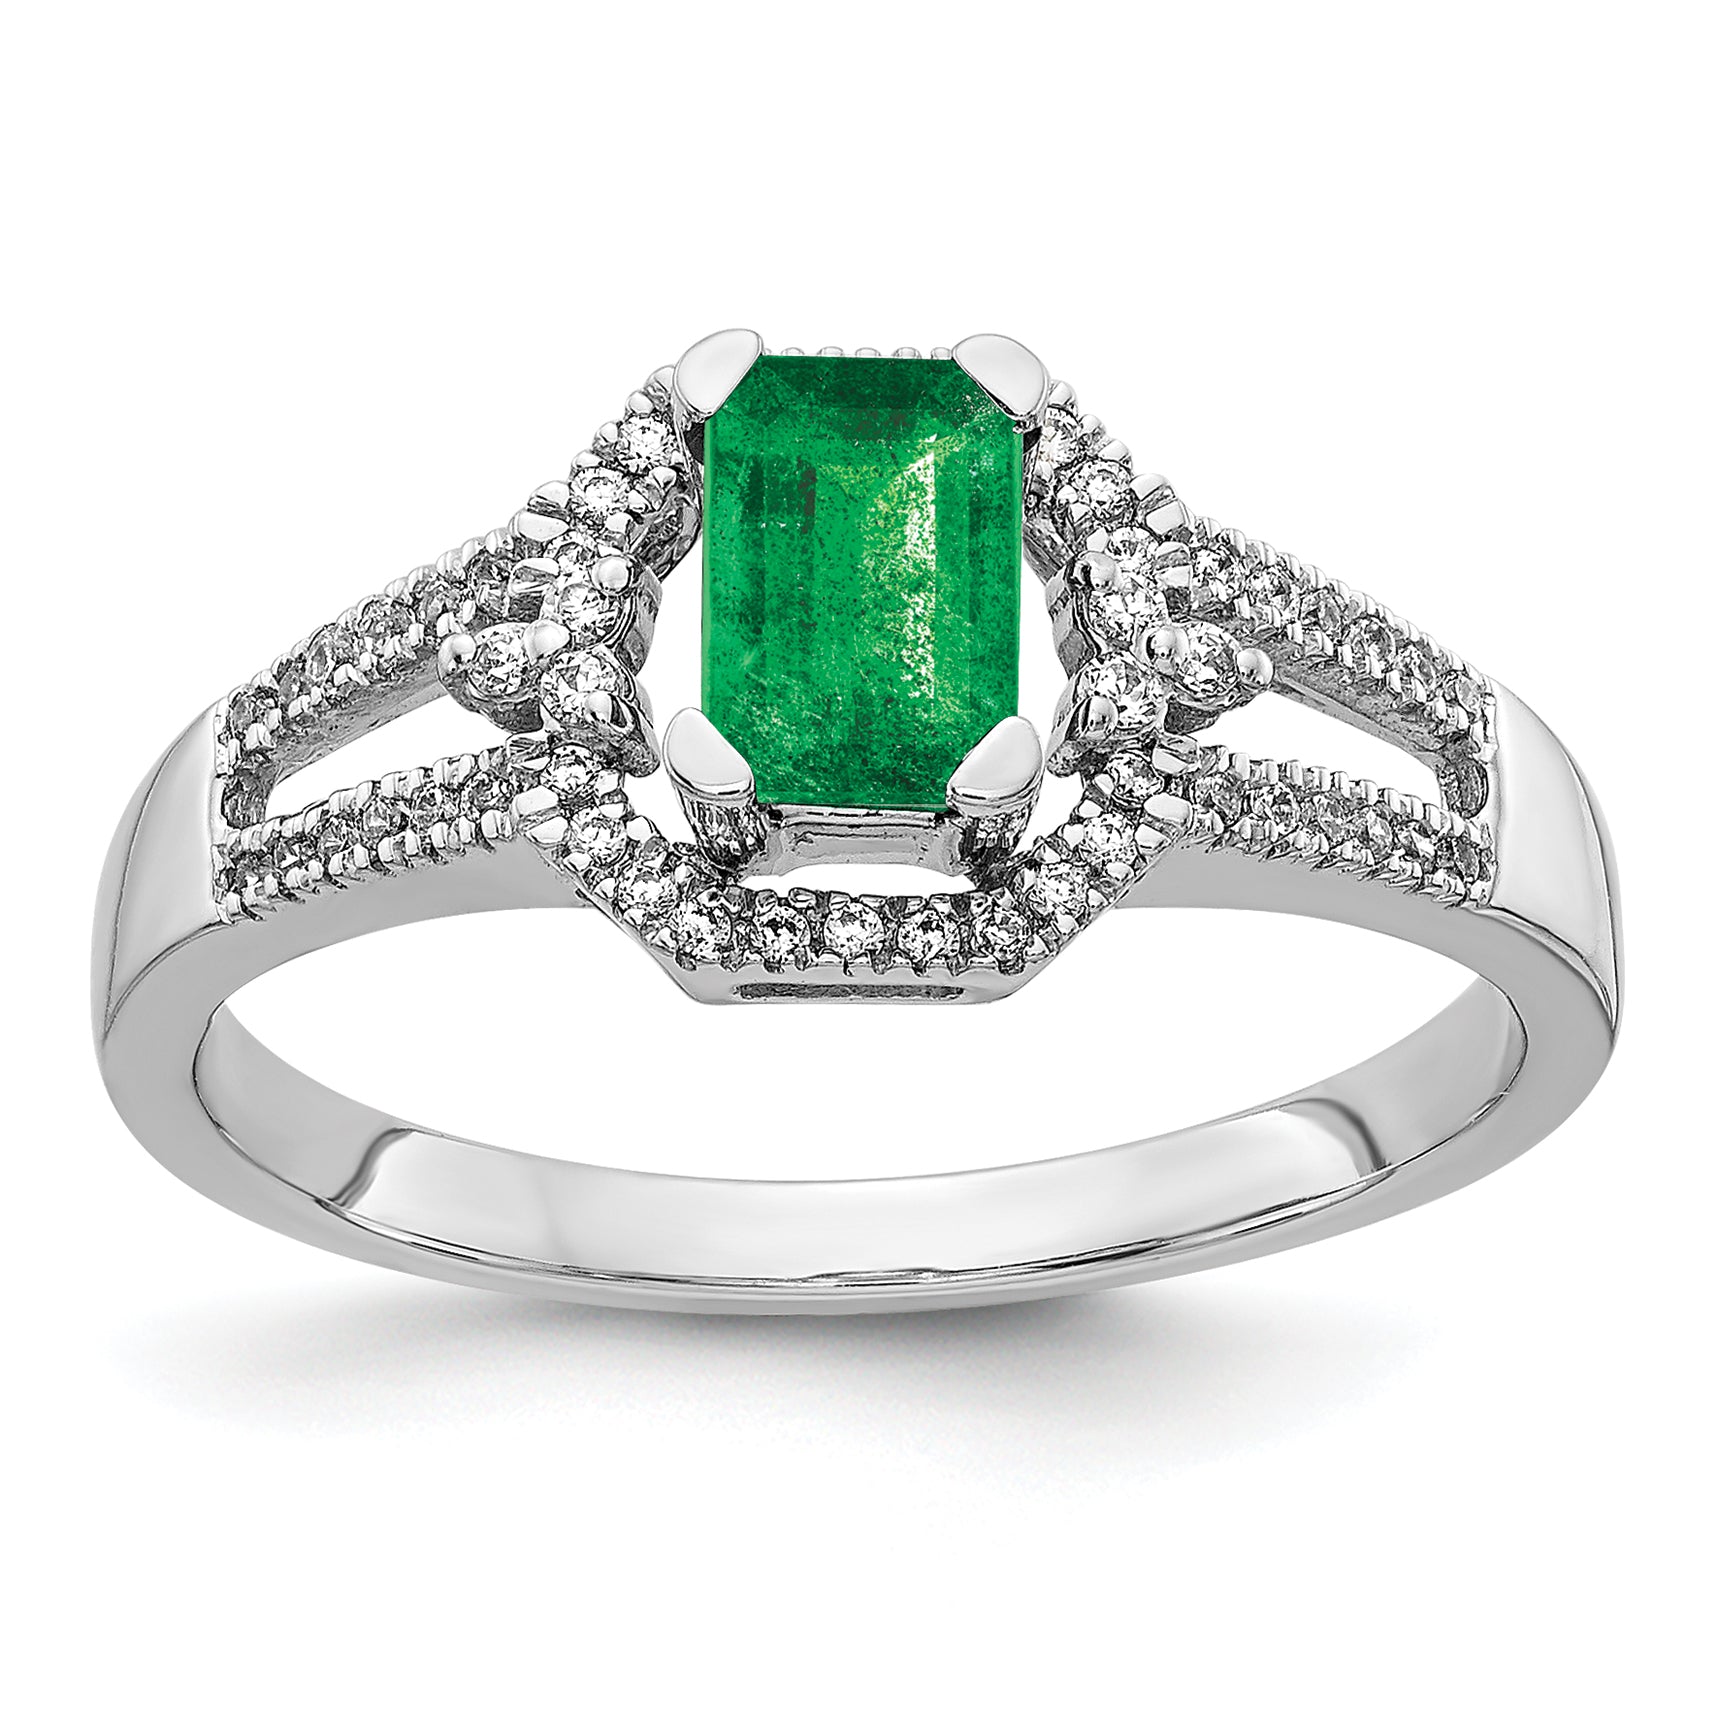 14k White Gold Diamond and Emerald Ring